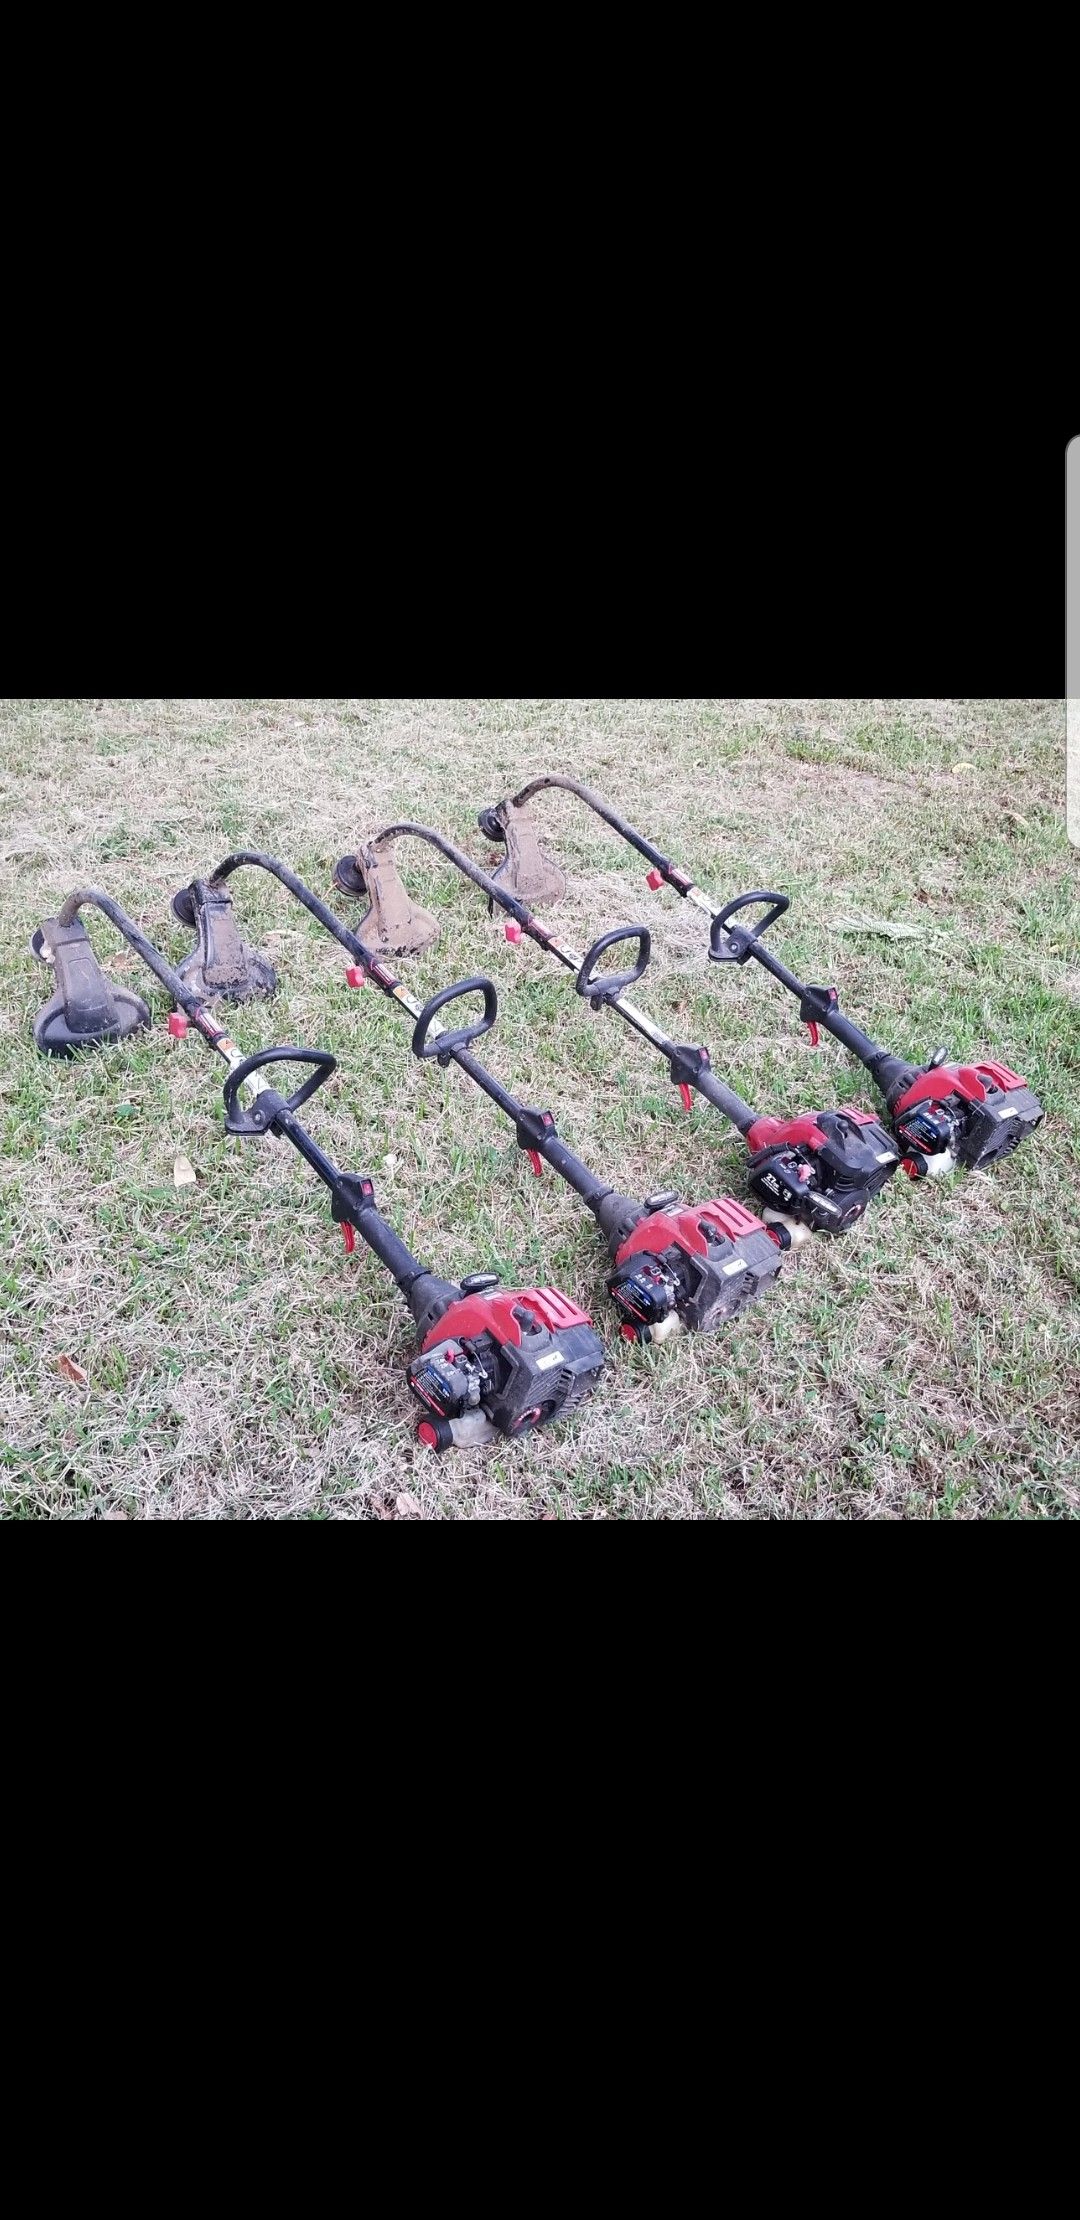 4 Craftsman gas trimmers